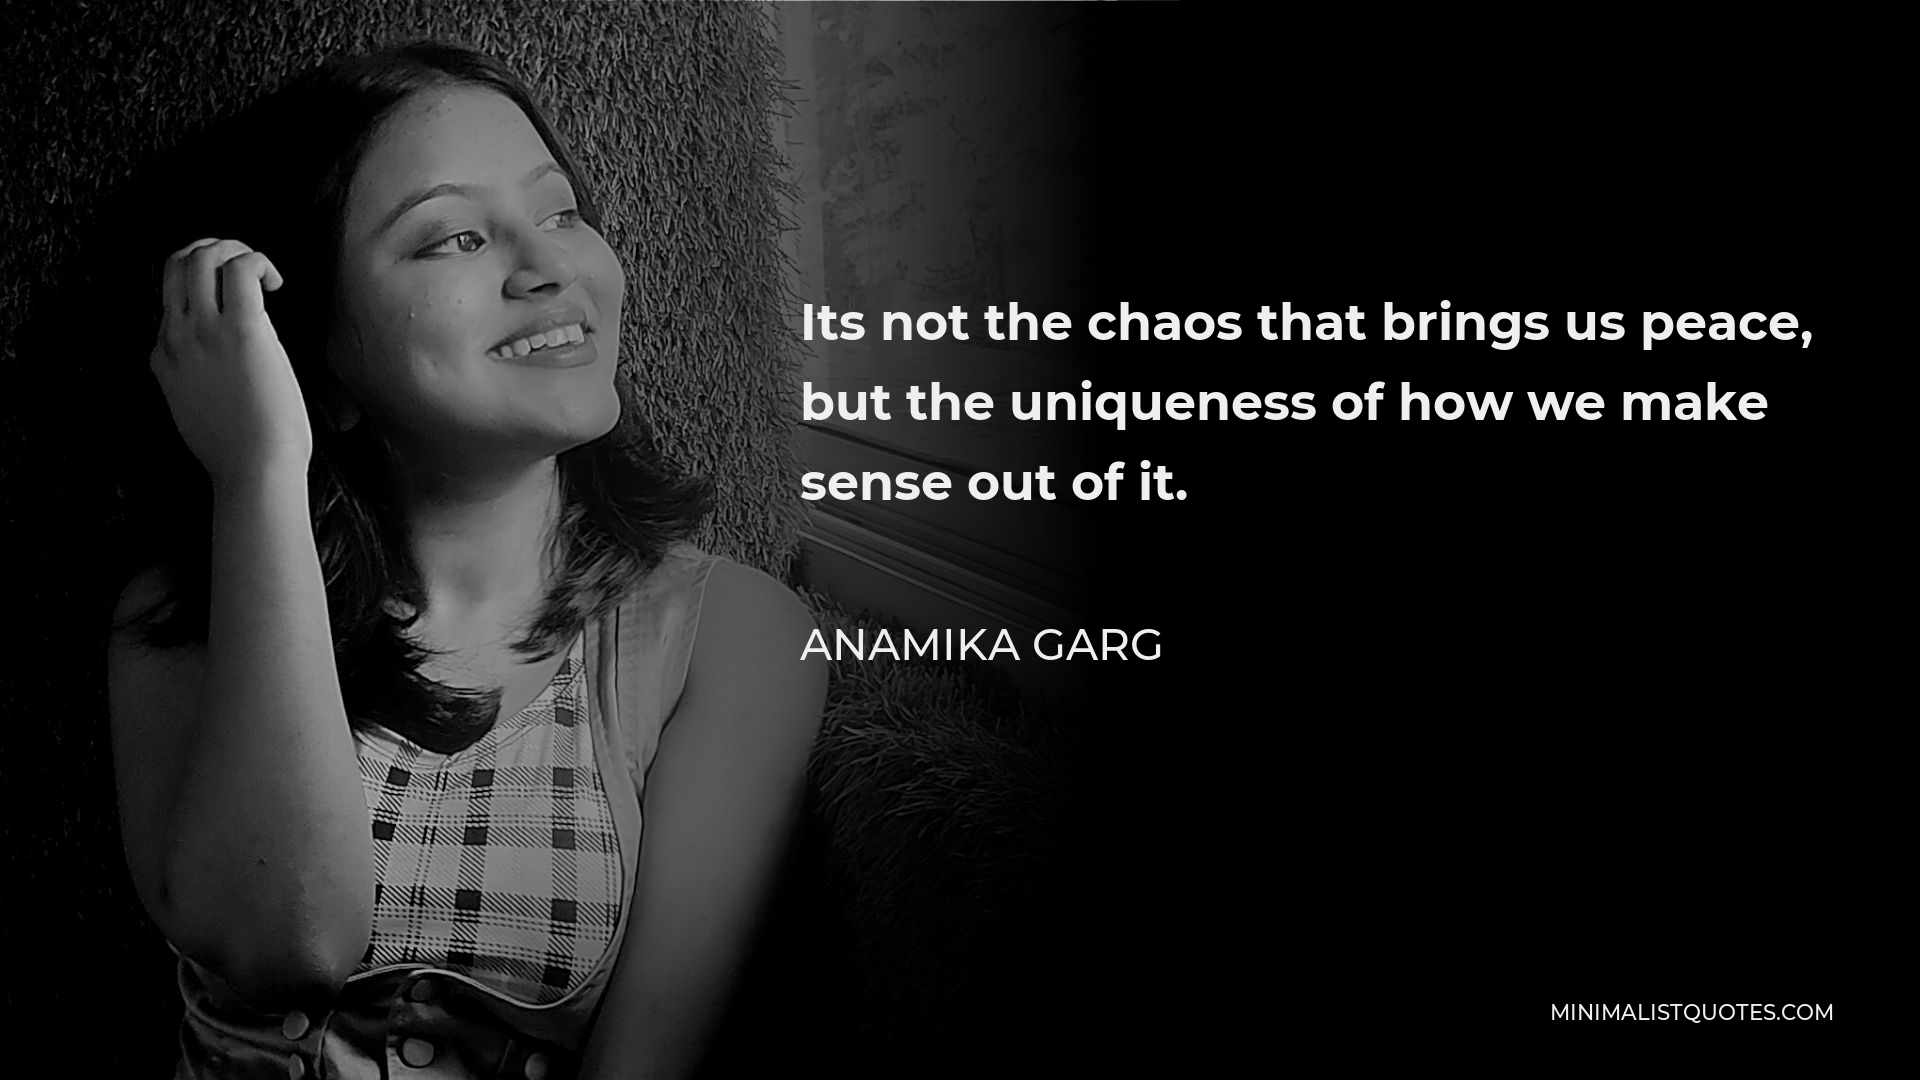 Anamika Garg Quote - Its not the chaos that brings us peace, but the uniqueness of how we make sense out of it.